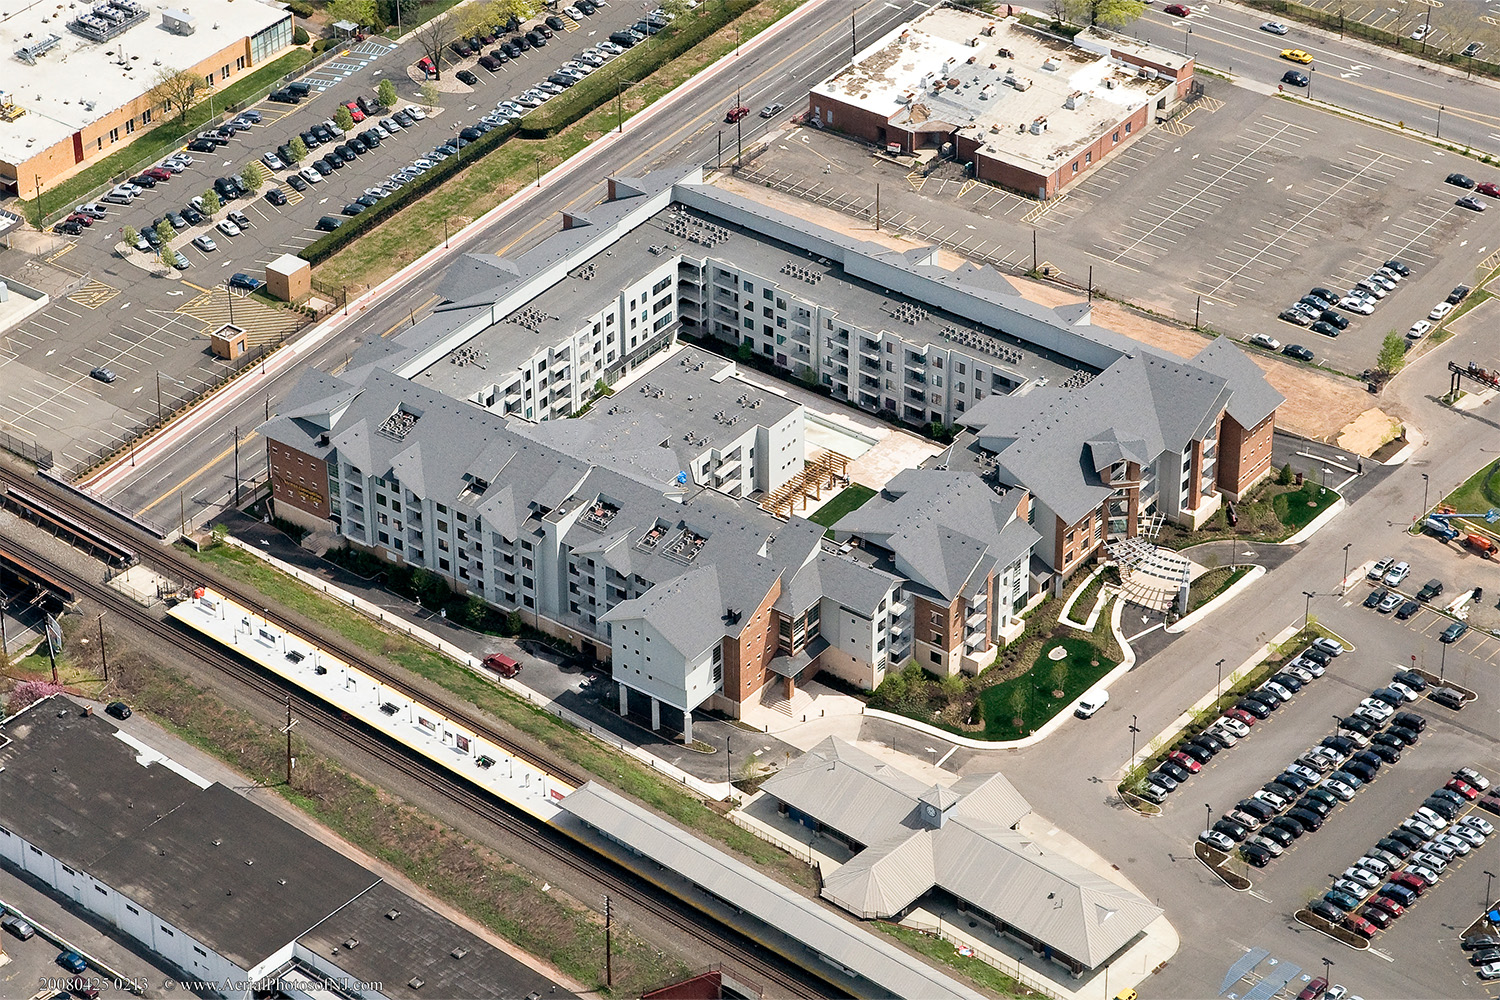 Drone view of the AVE Union complex